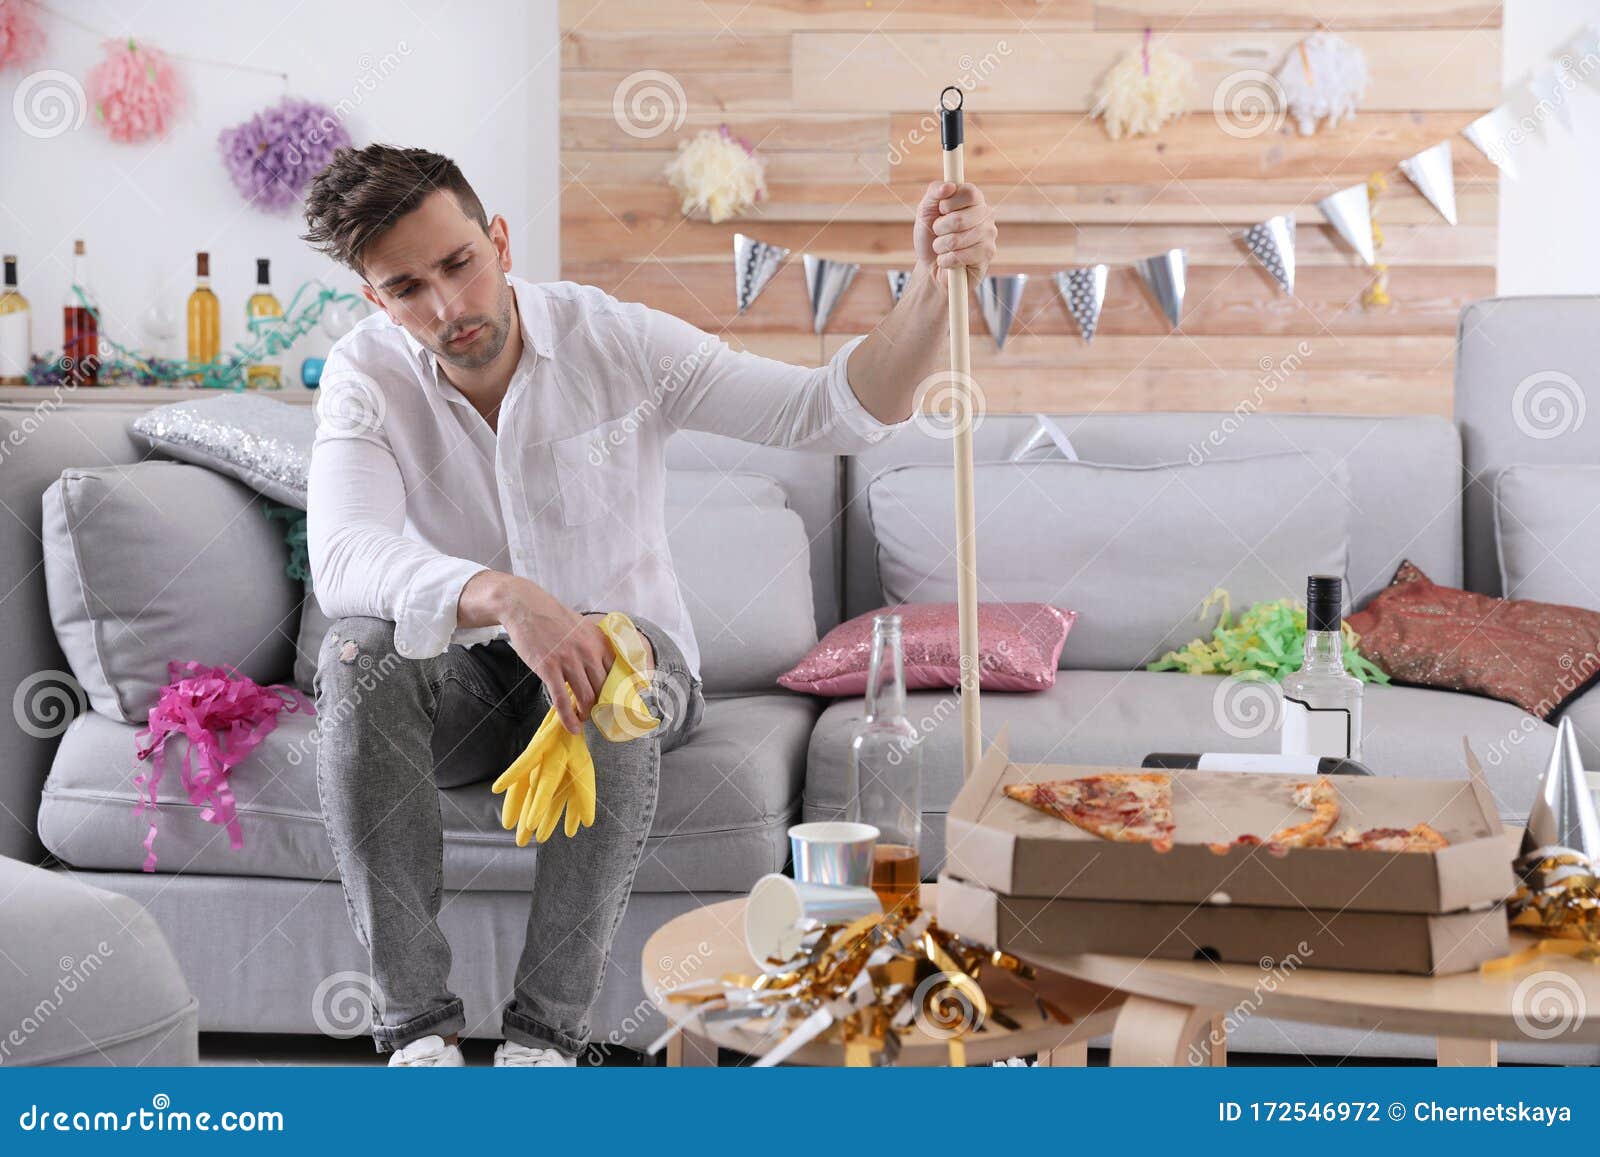 young man with mop suffering from hangover in room after party